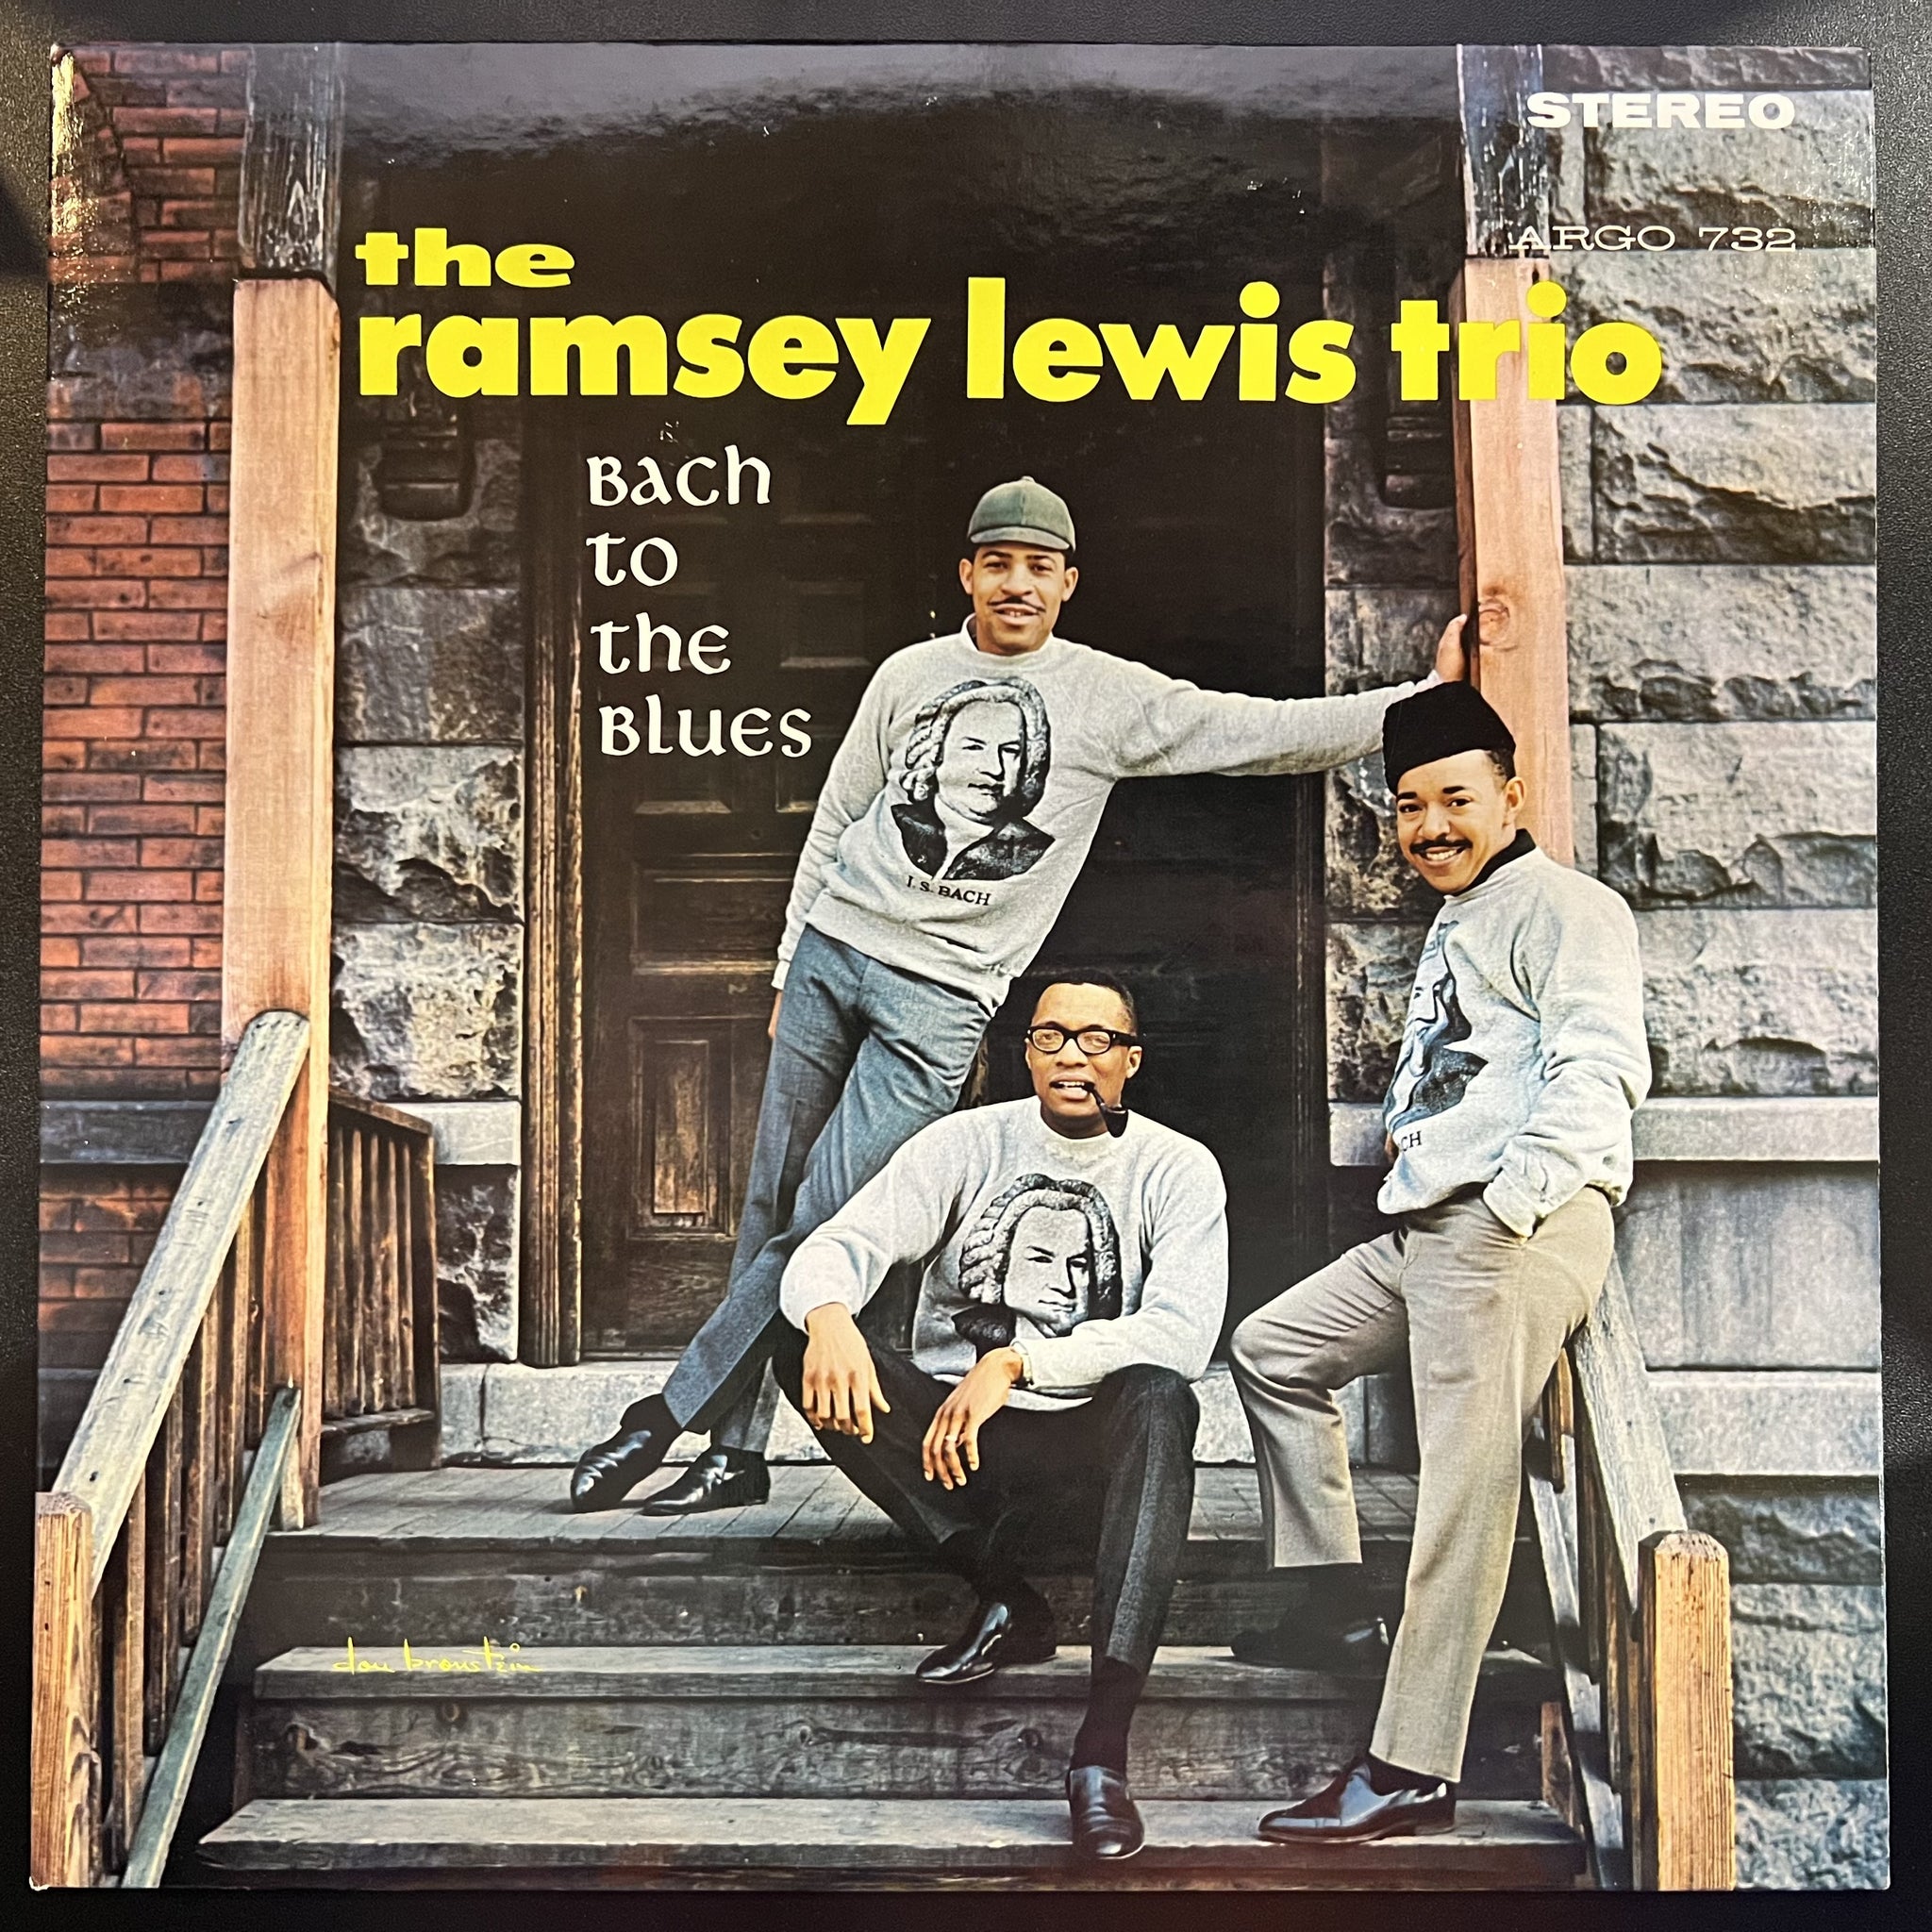 The Ramsey Lewis Trio – Bach To The Blues - Mint- LP Record 1964 Cadet USA Vinyl - Soul-Jazz / Classical